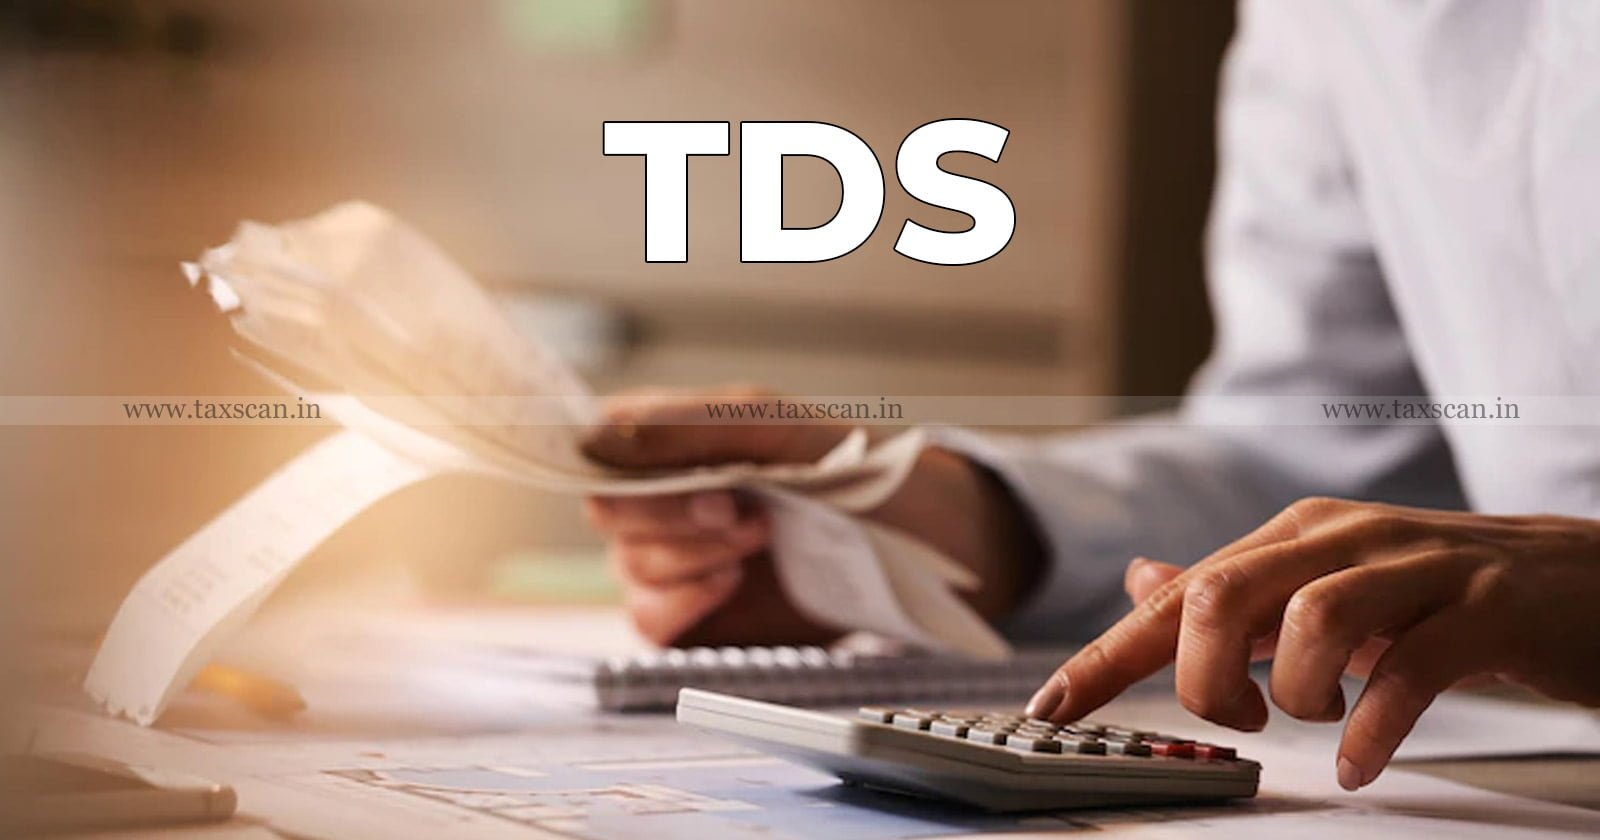 TDS - Payment - Payment of Fee - Singapore Entity - ITAT - Standard Chartered - Taxscan